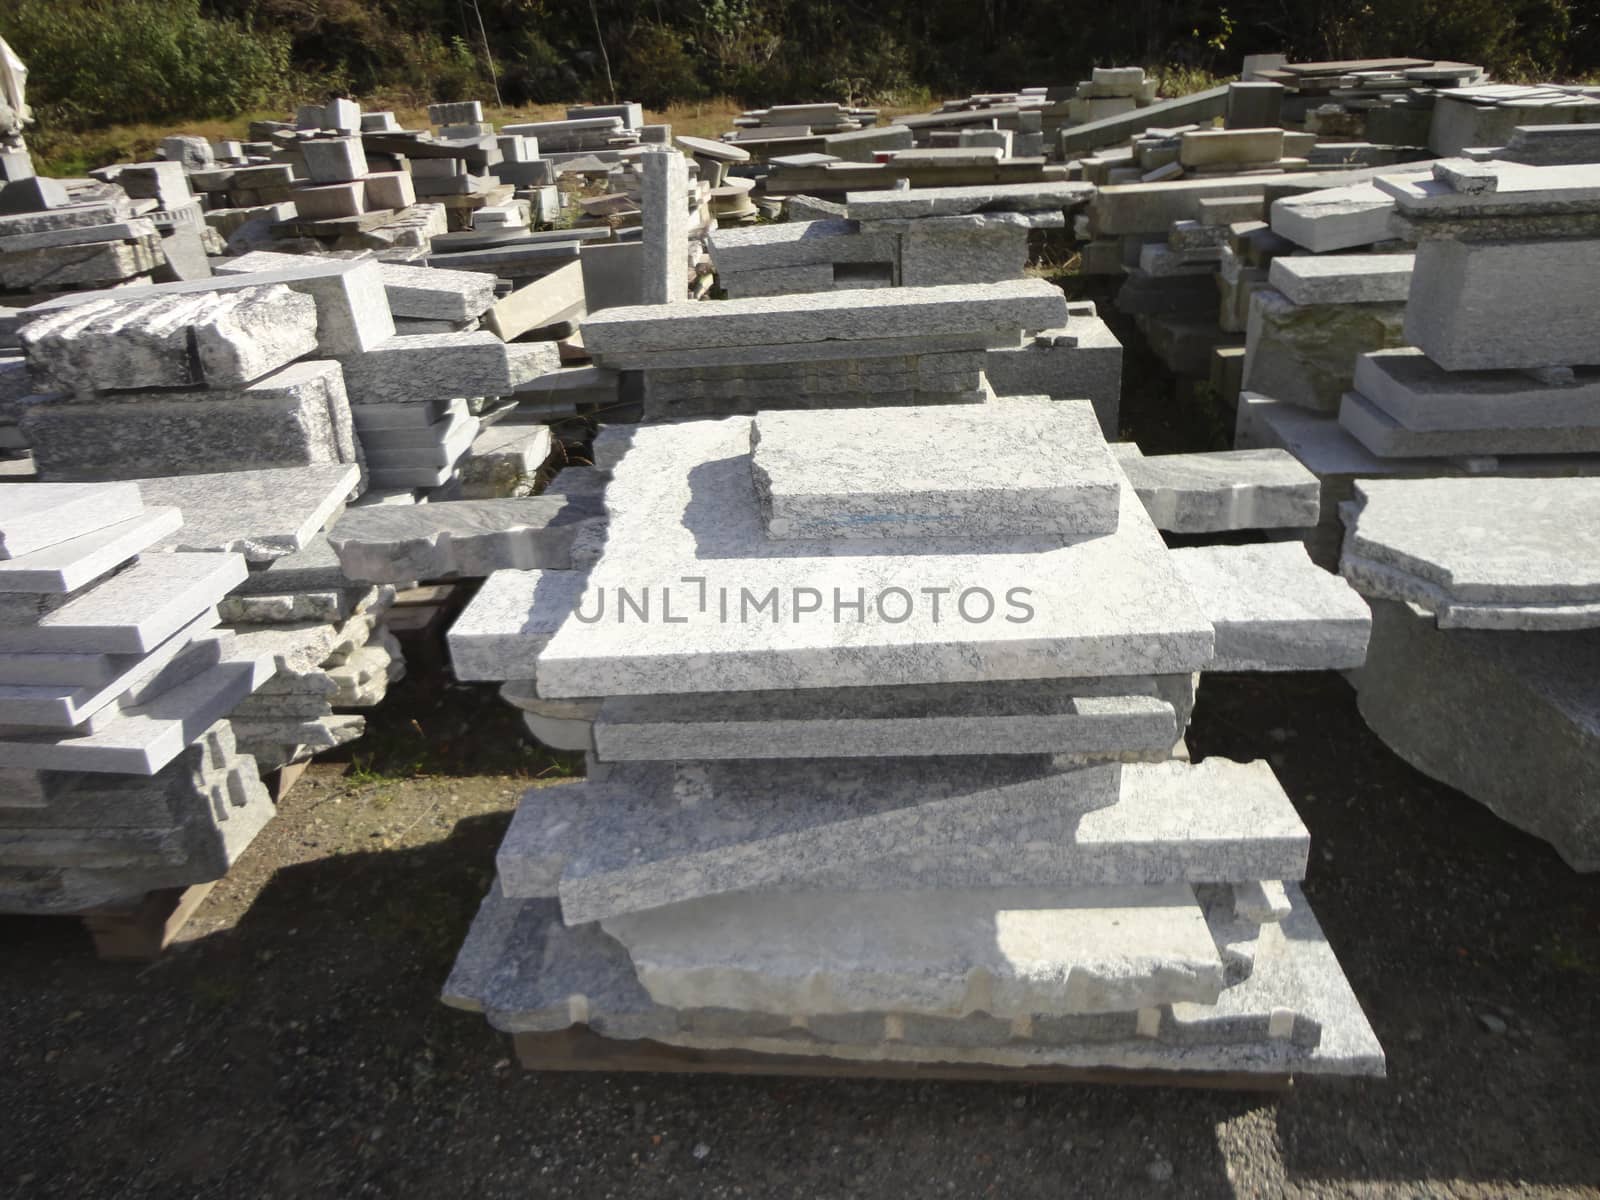 Stacks of granite slabs in a yard under sunlight by madfoto